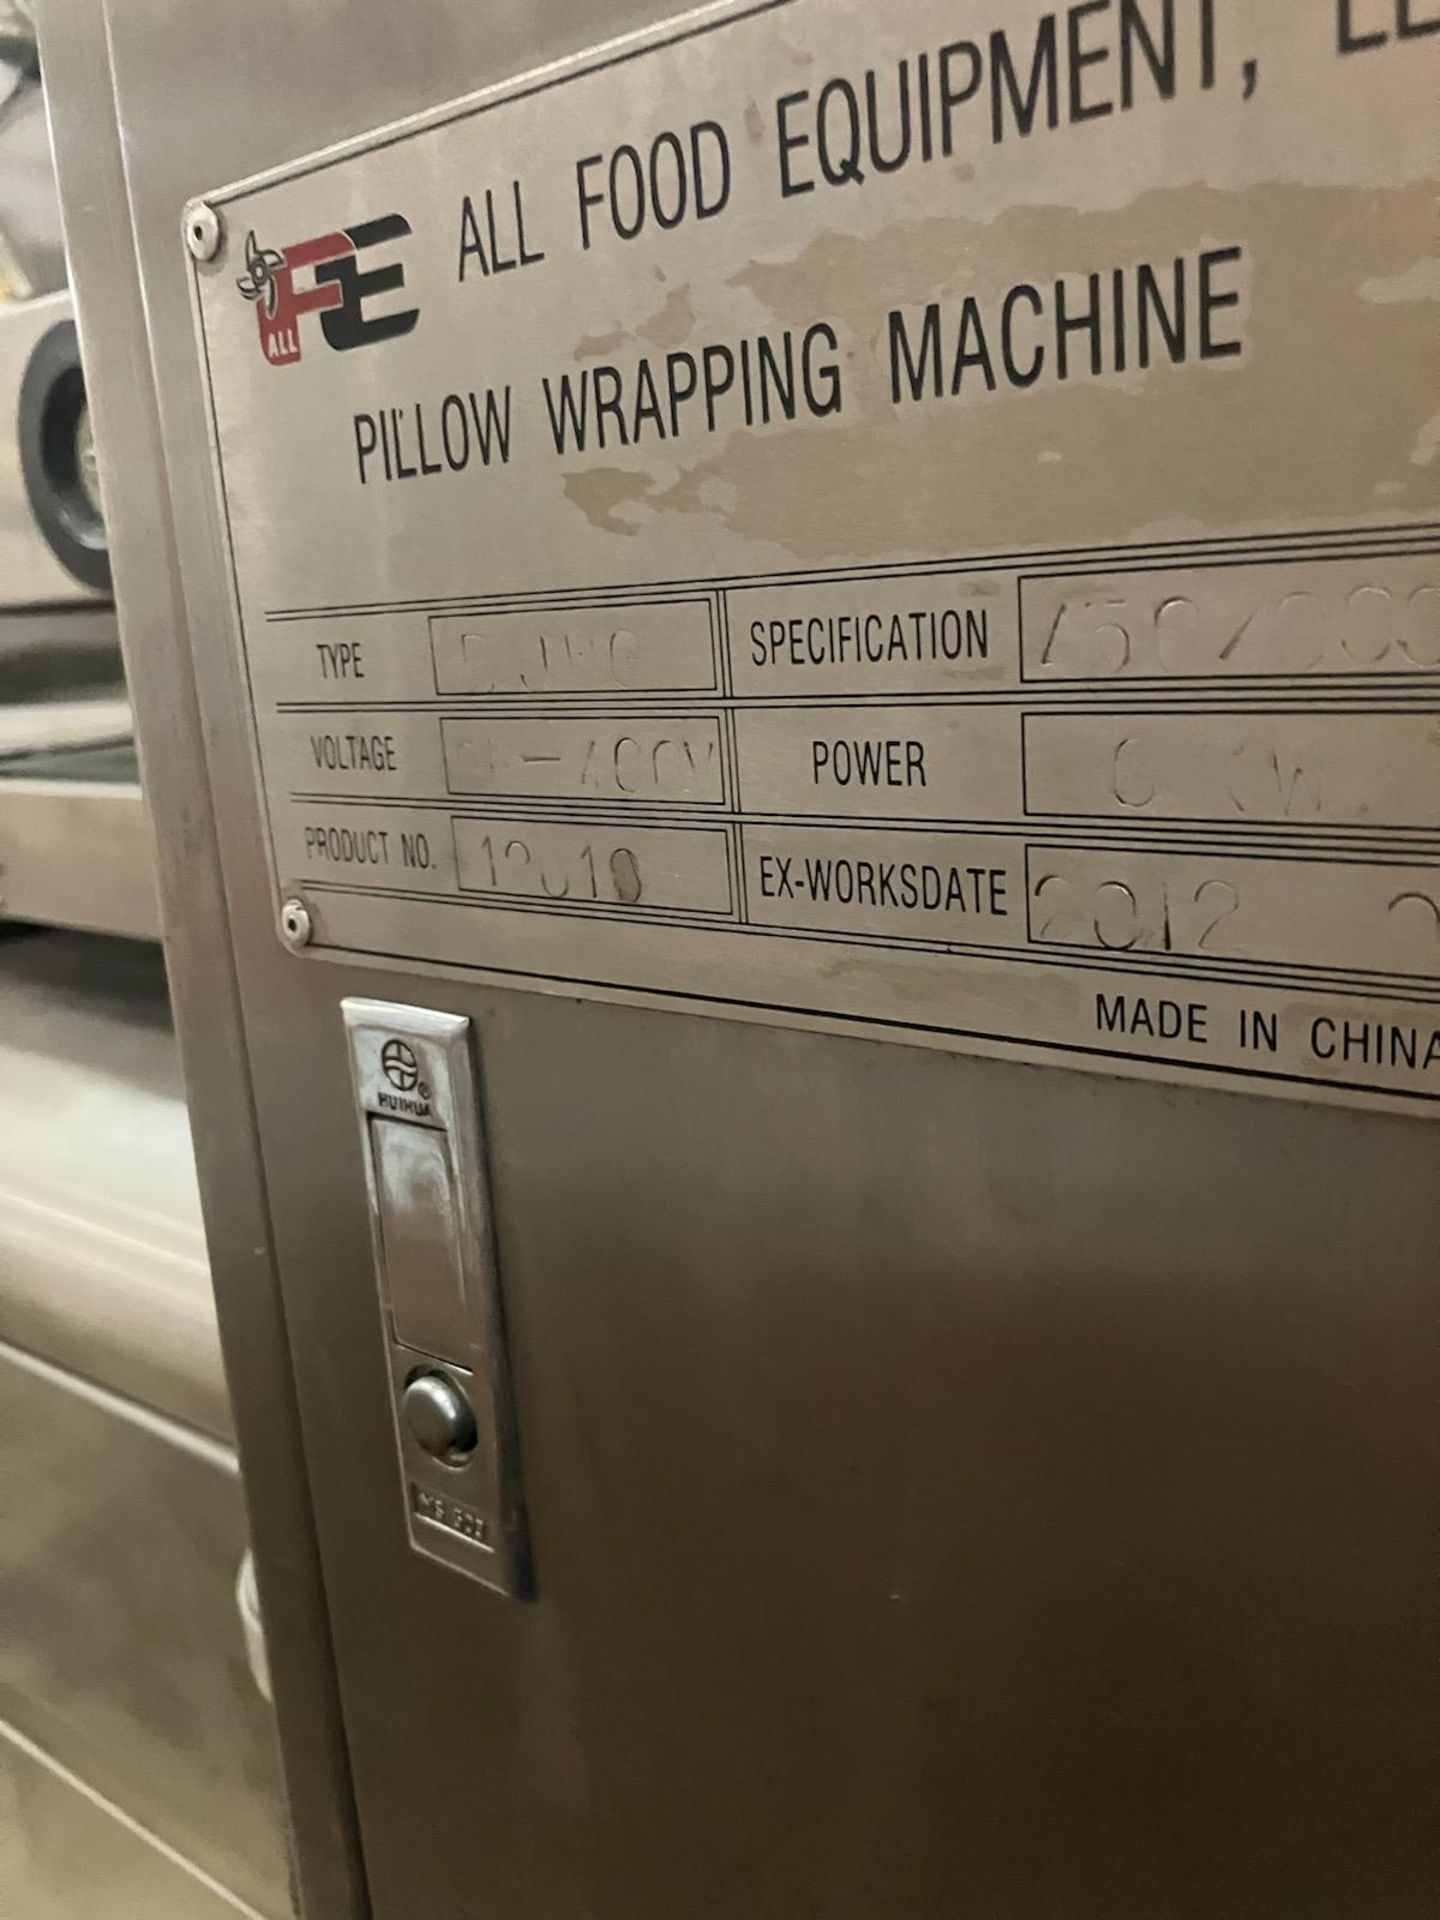 All Food Equipment (AFE) Pillow Wrapping Machine / Tray Wrapper, 480 VAC / 3 Phase | Rig Fee $100 - Bild 2 aus 7